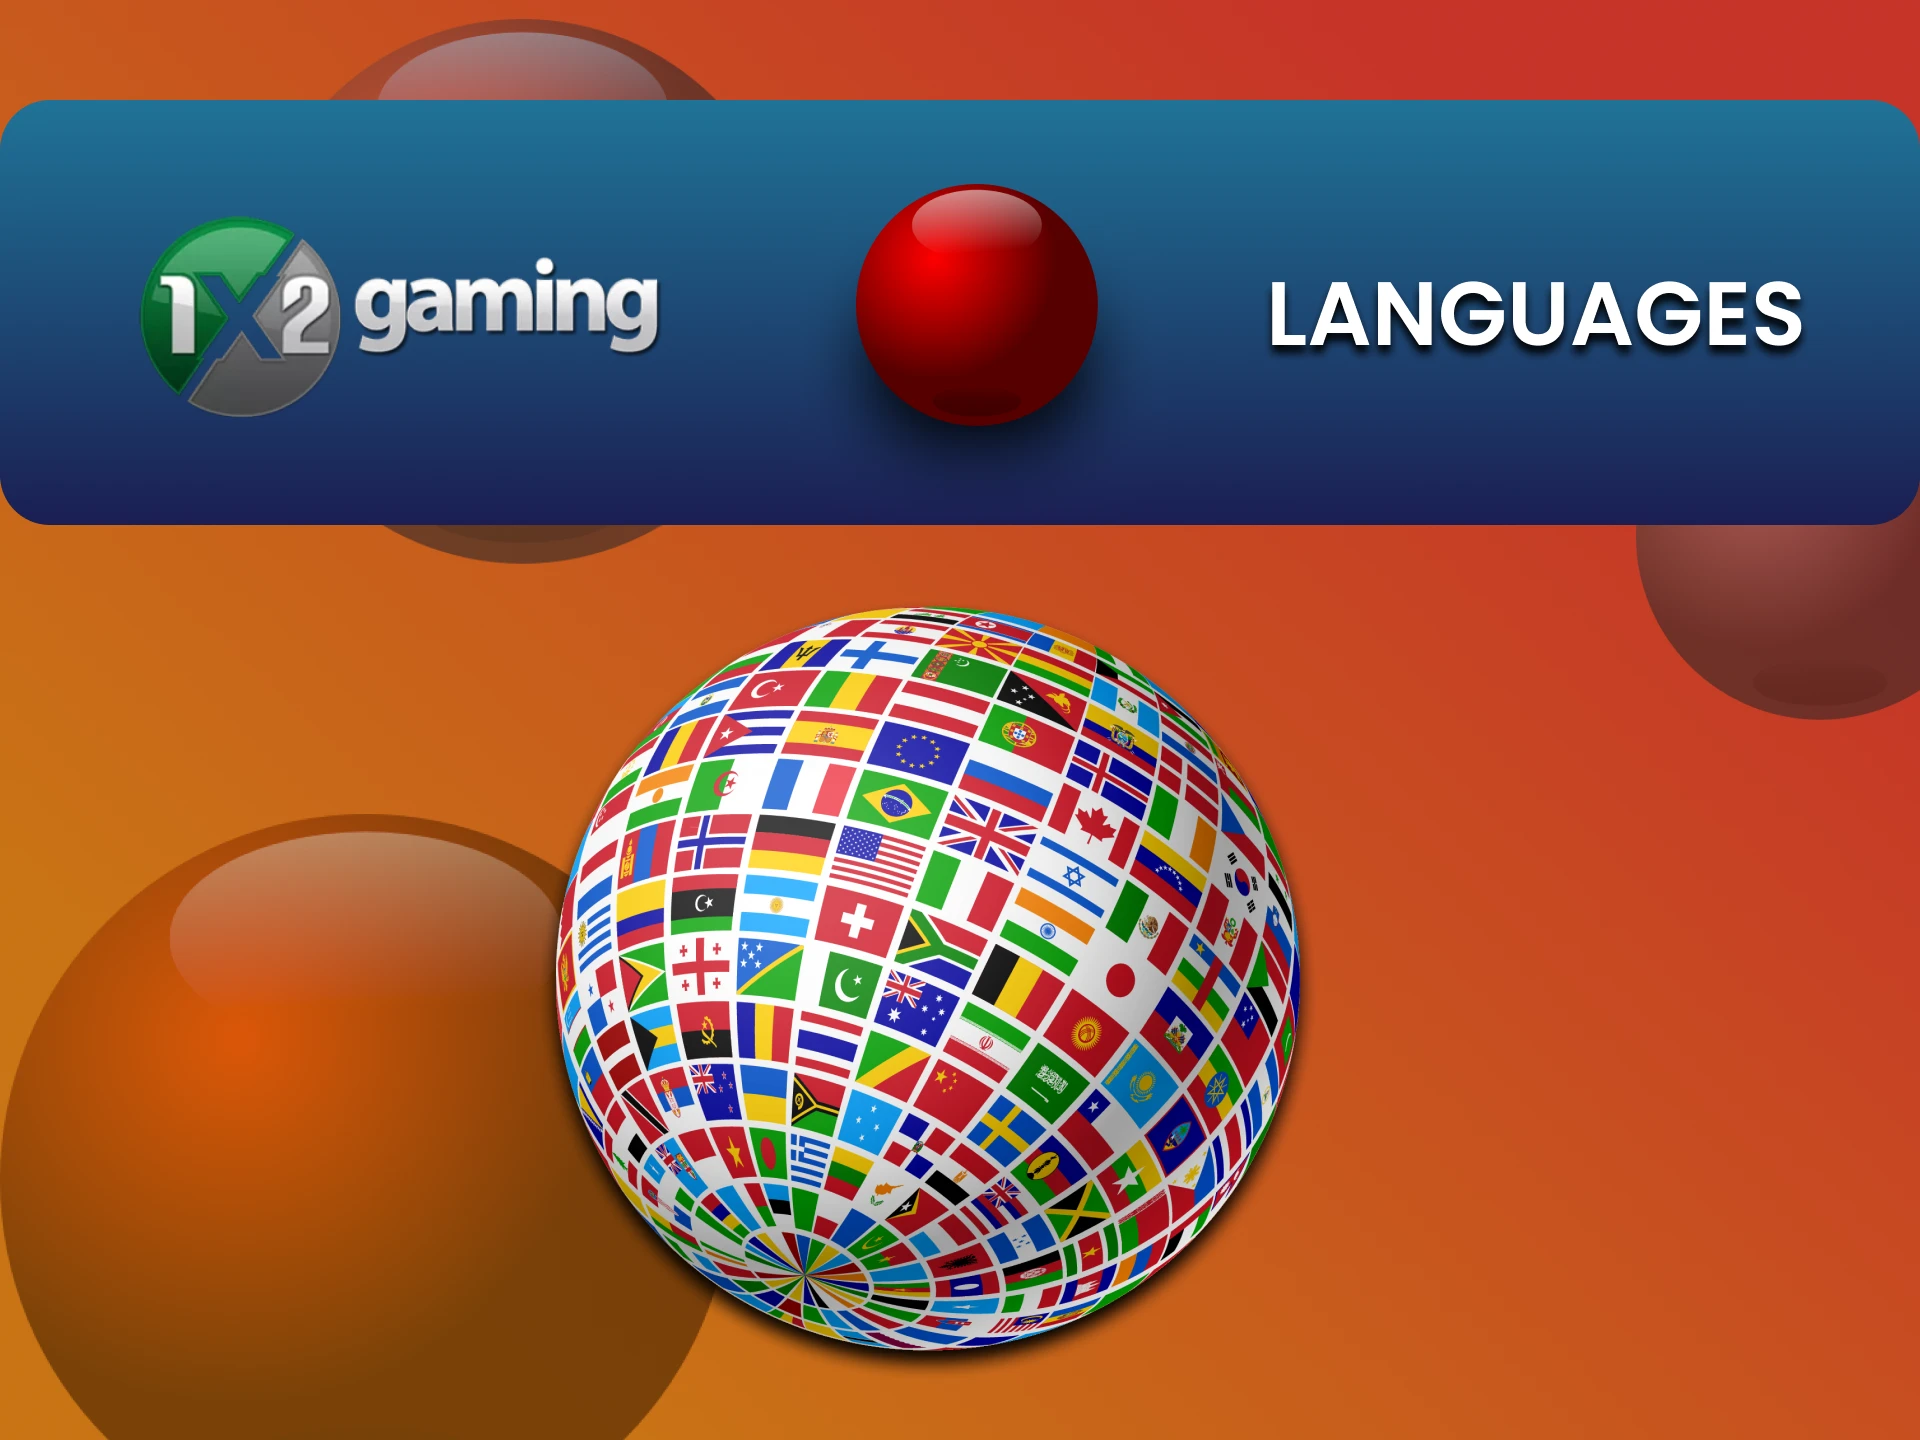 Find out in which languages ​​you can play games from 1x2 gaming.